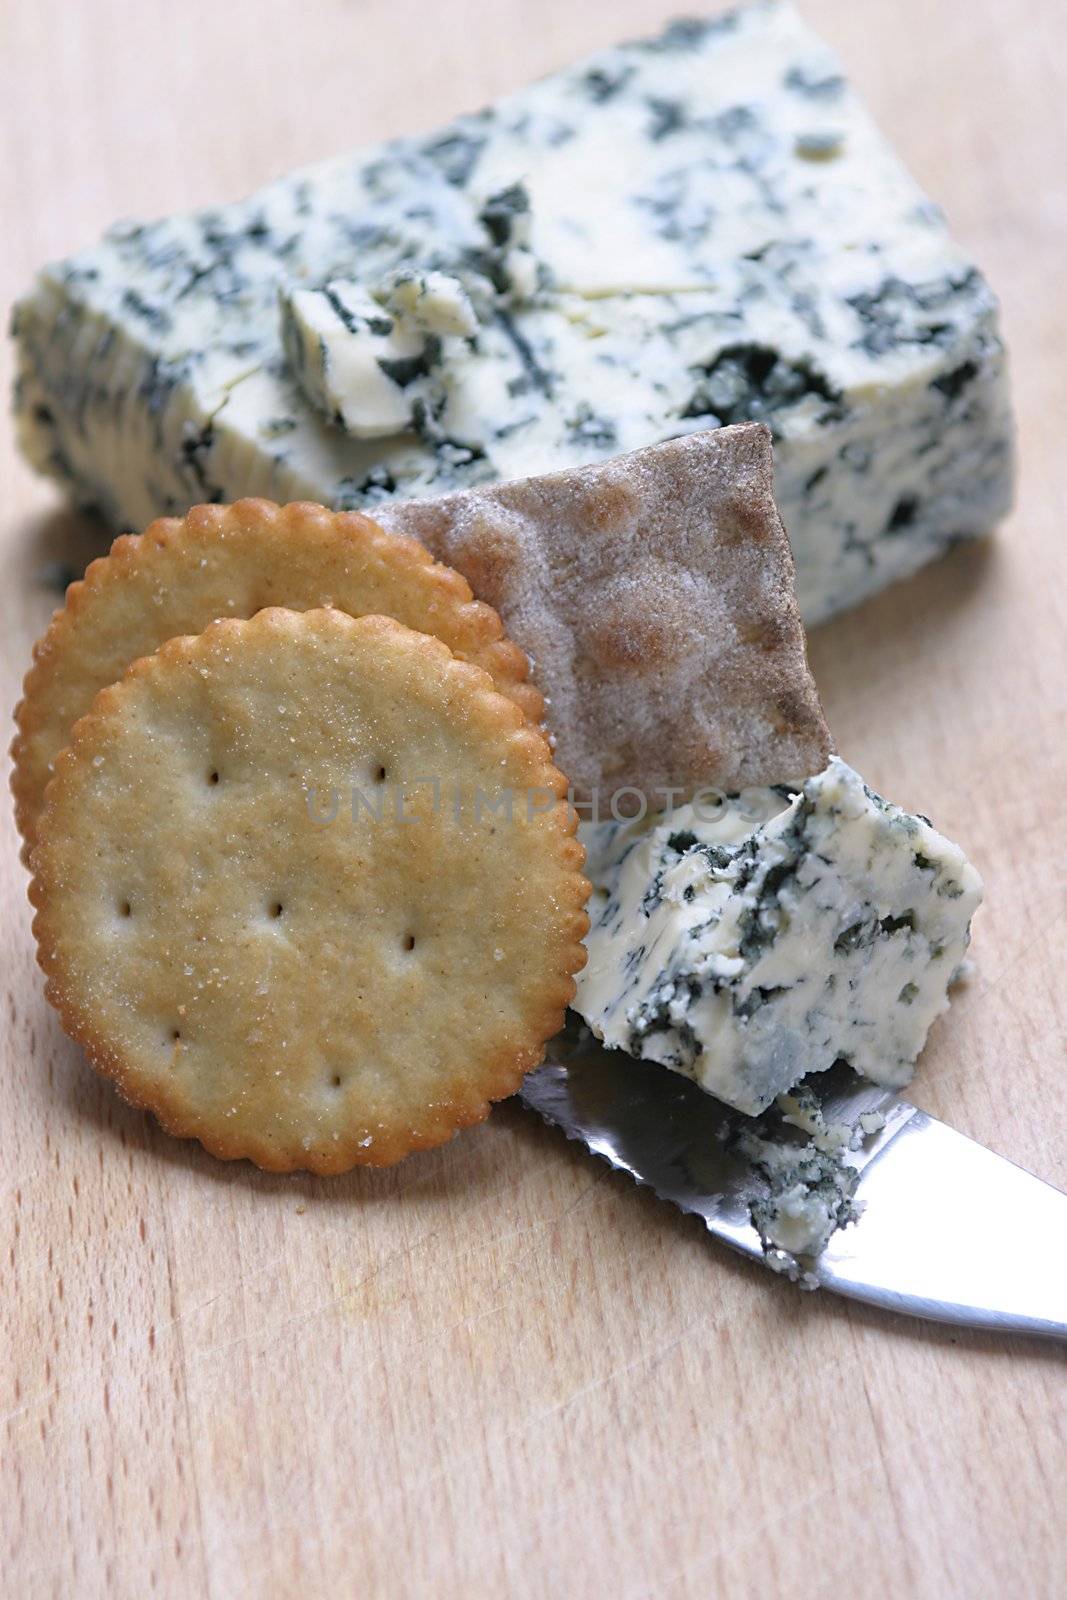 Blue cheese and crackers on a block of wood